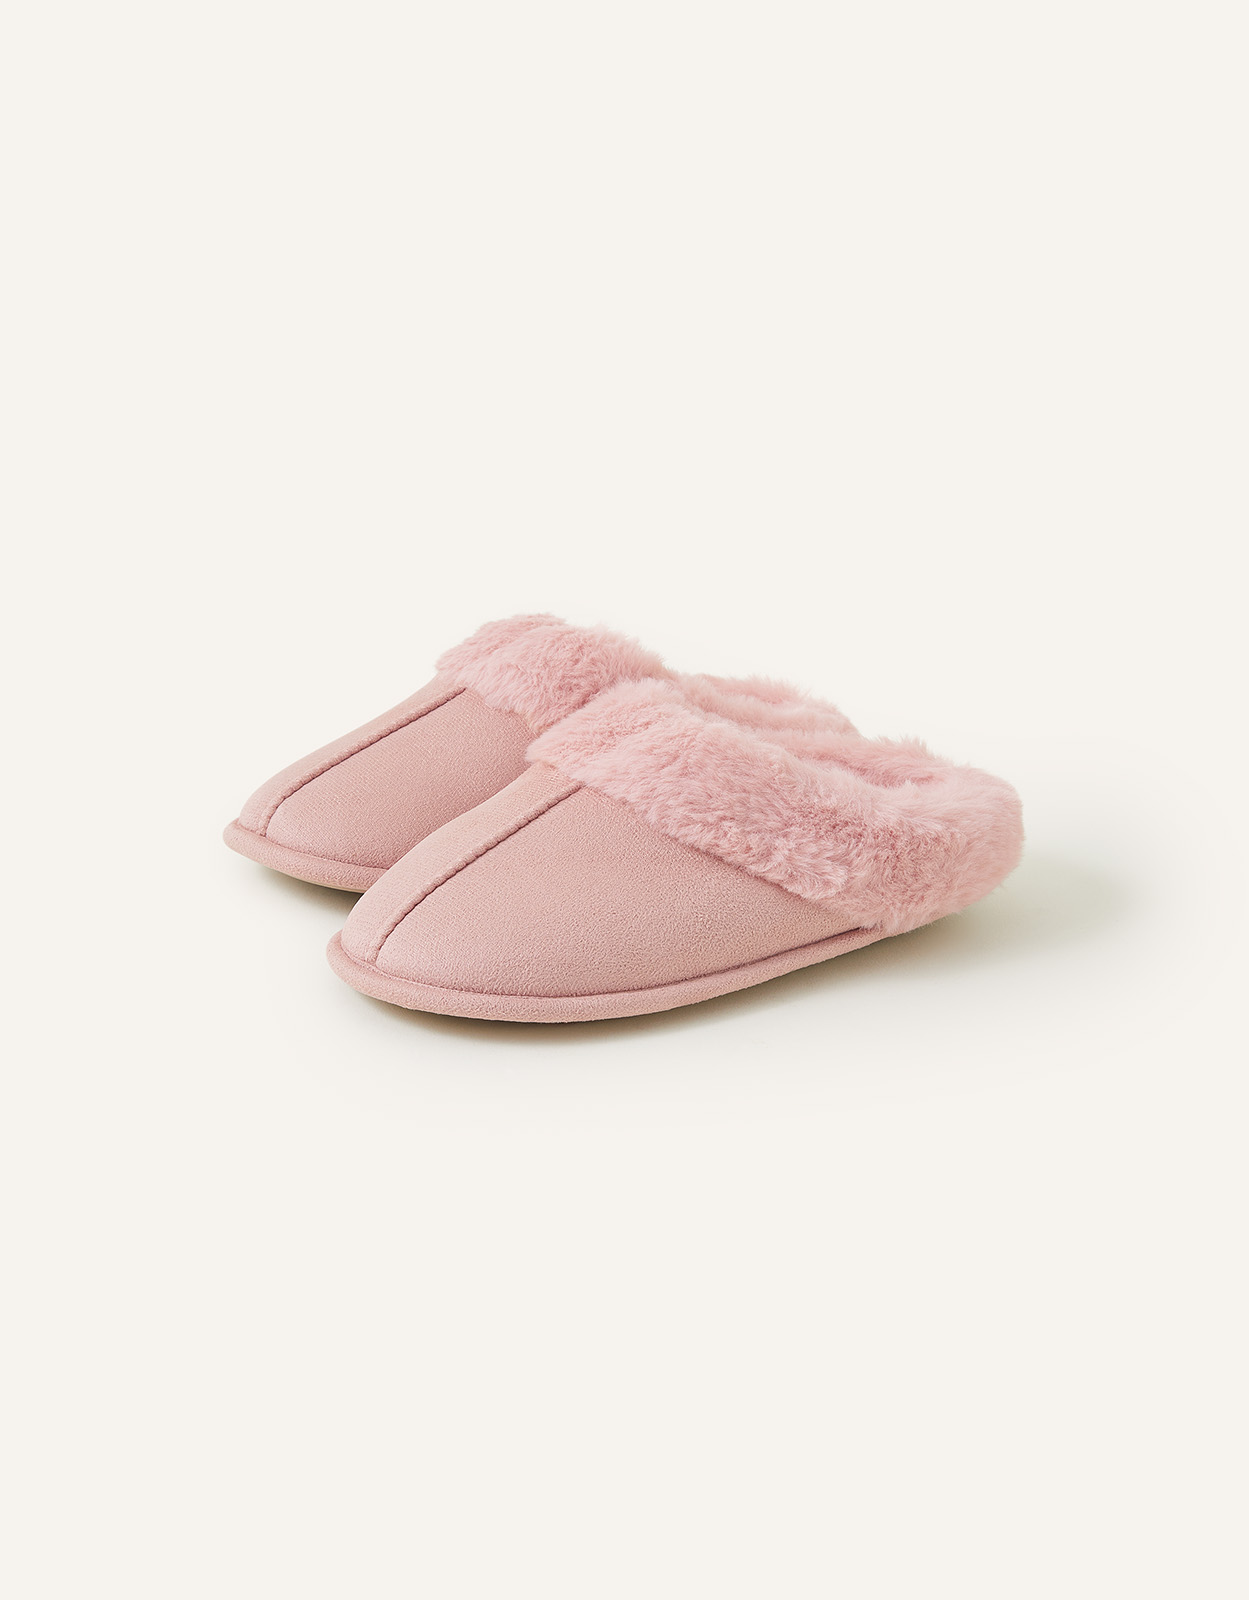 Accessorize Faux Fur Mule Slippers Pink, Size: S